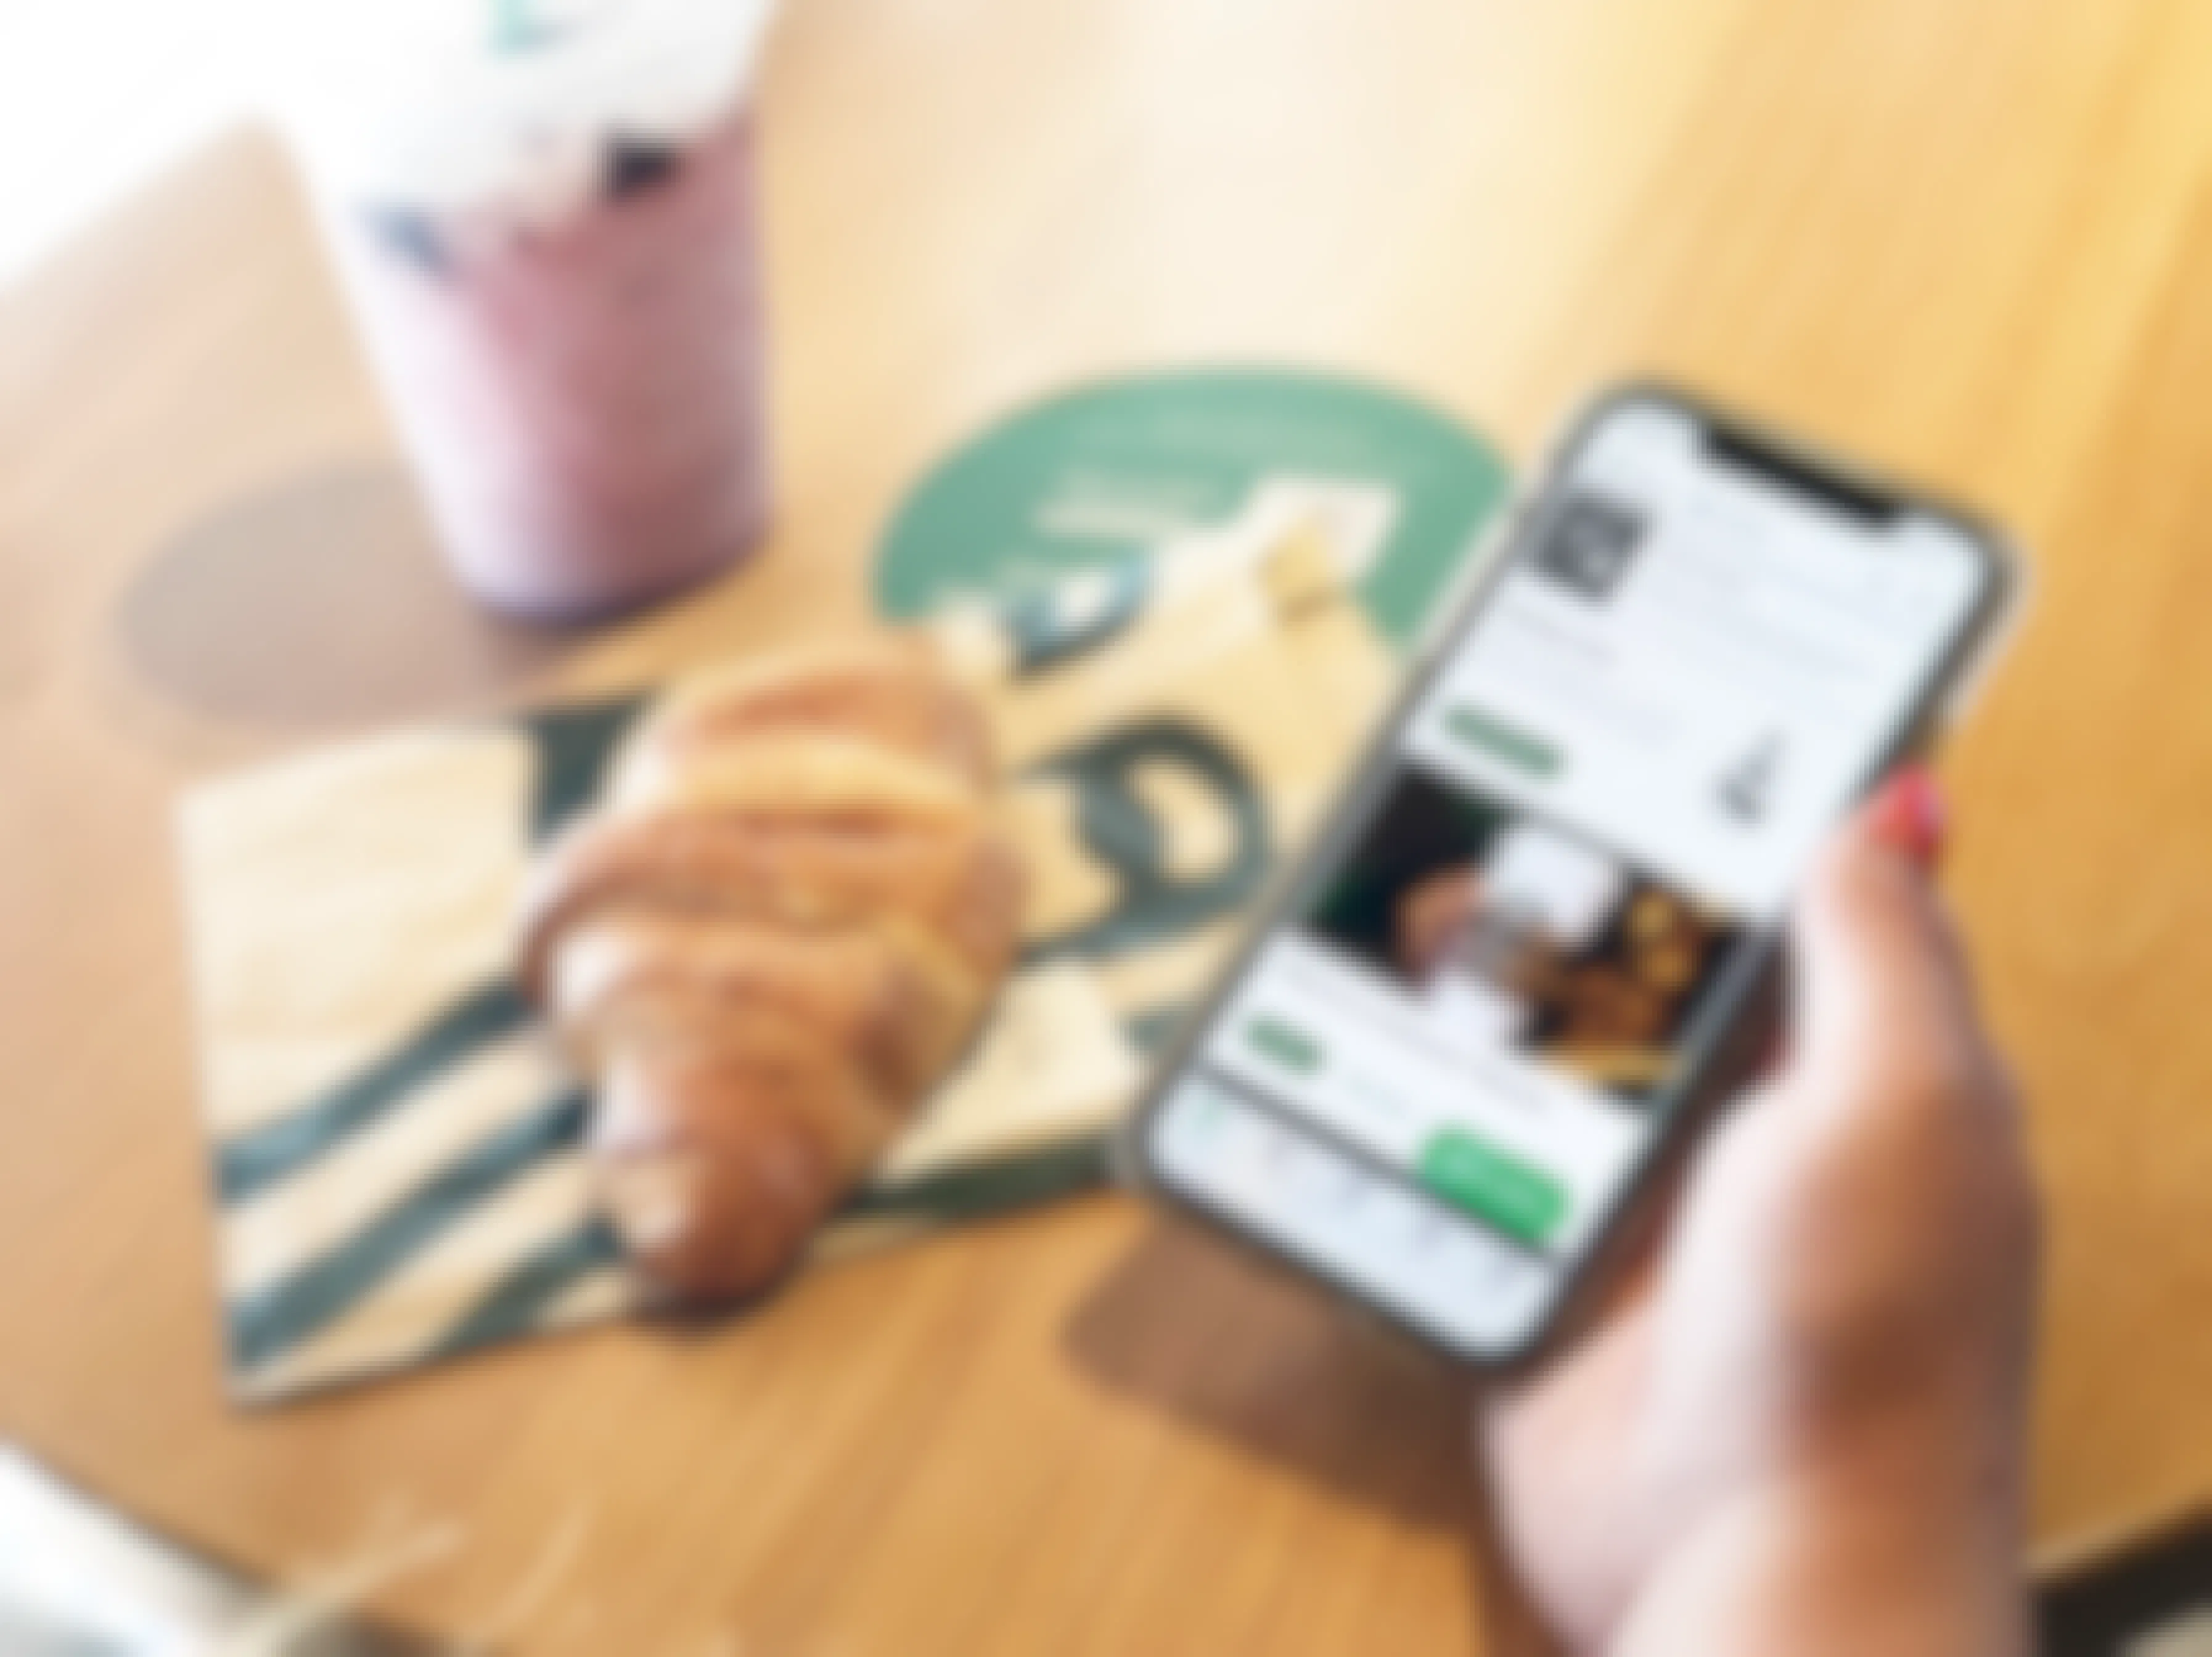 A person holding a smartphone with the Starbucks app open above a table with a croissant and drink sitting on it.